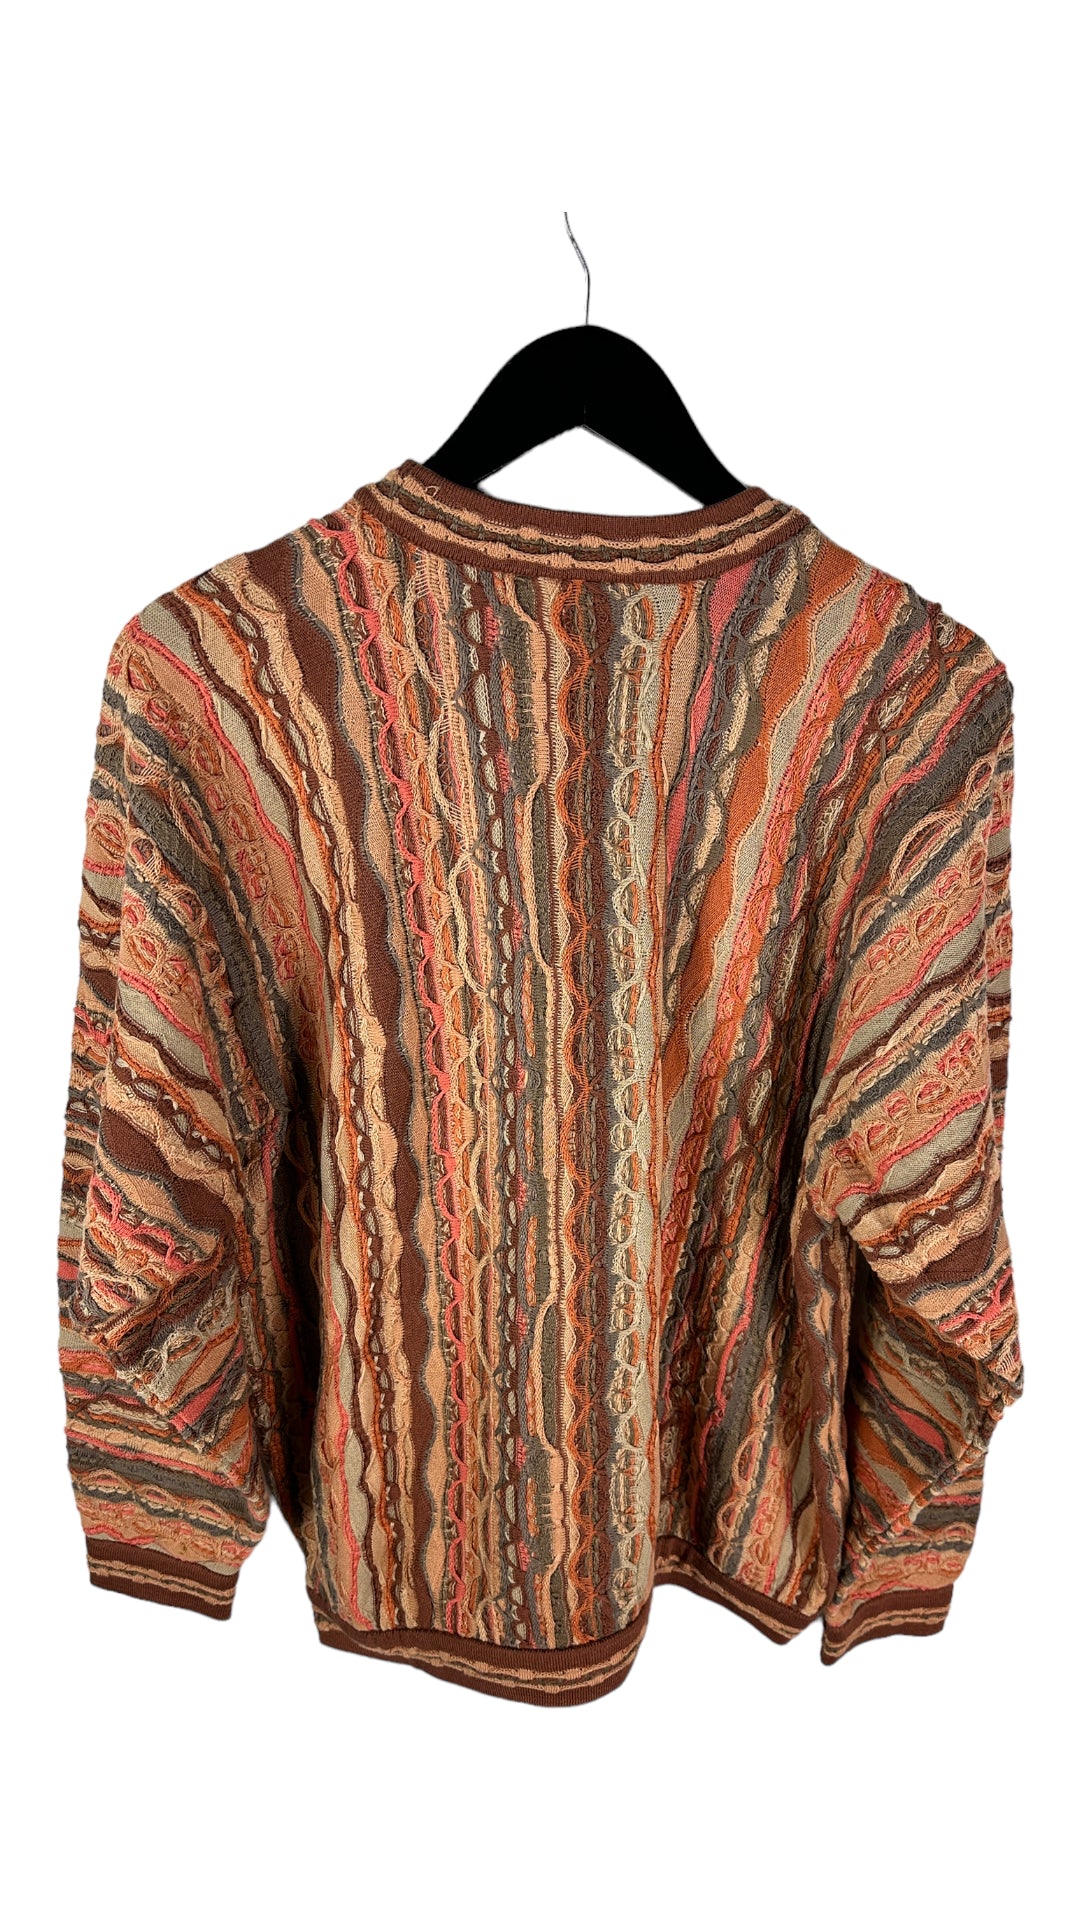 VTG Coogi Red Canyon 3D Embroidery Sweater Sz Med